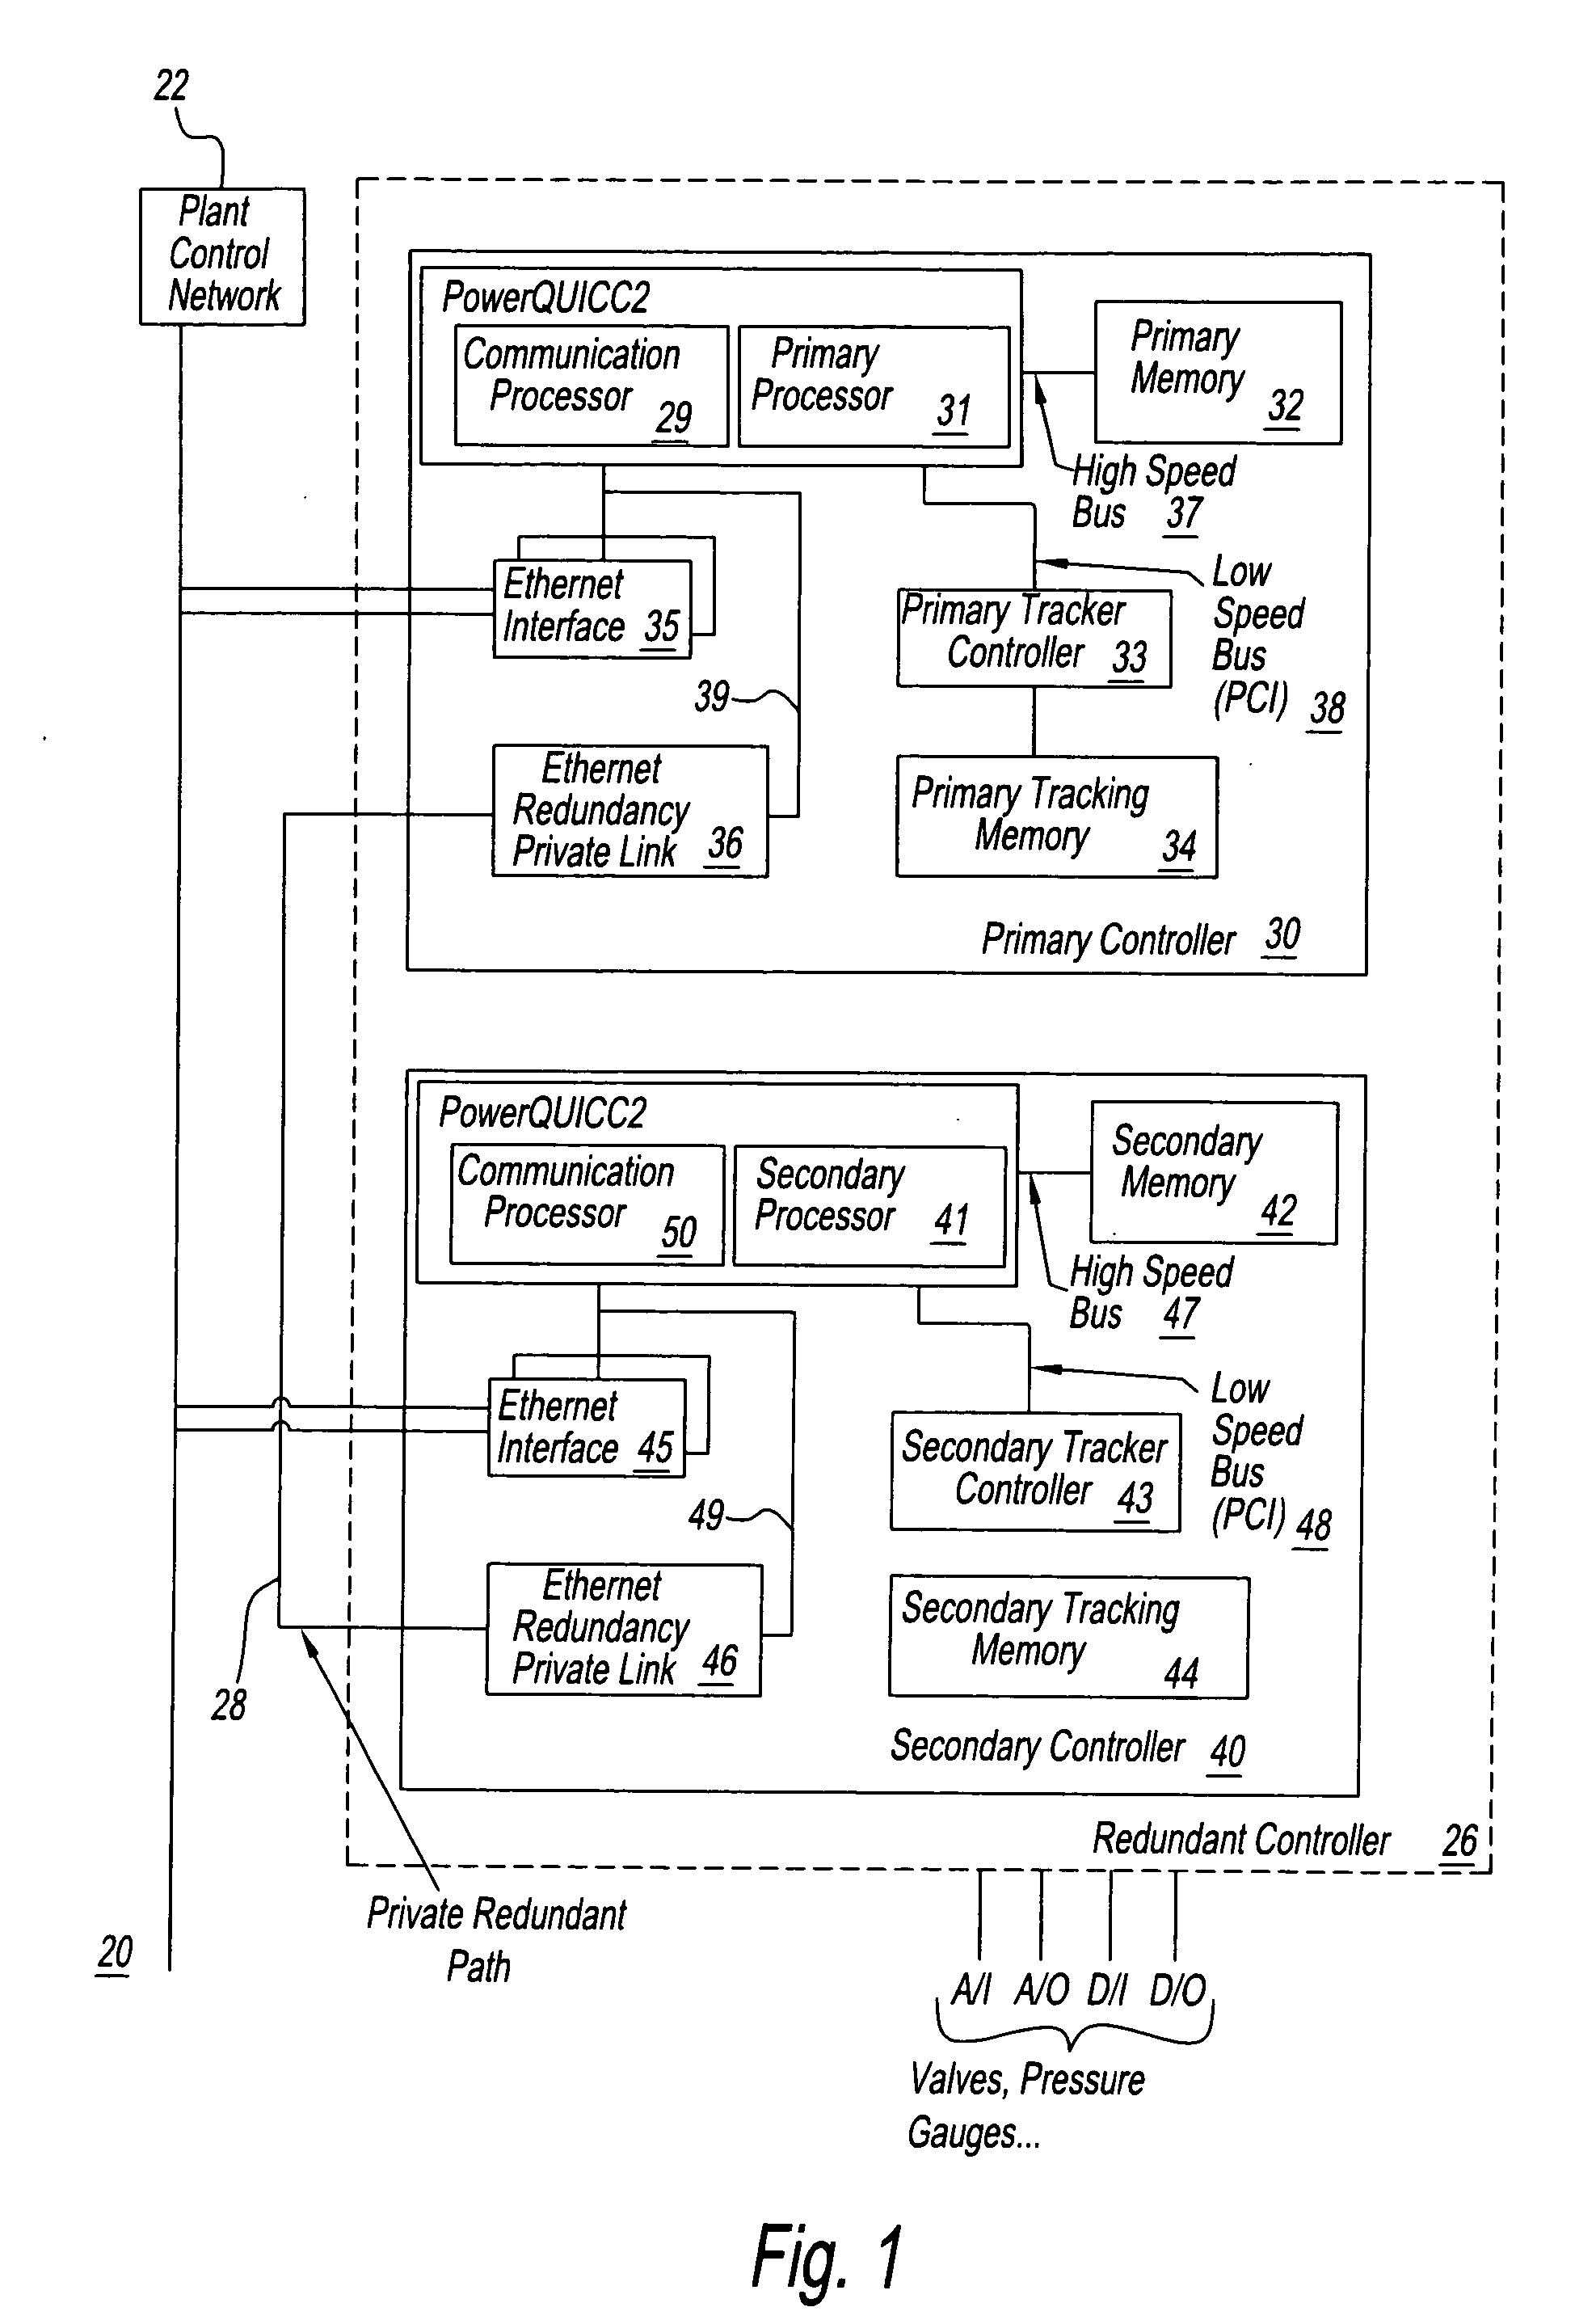 Method and apparatus for a redundancy approach in a processor based controller design